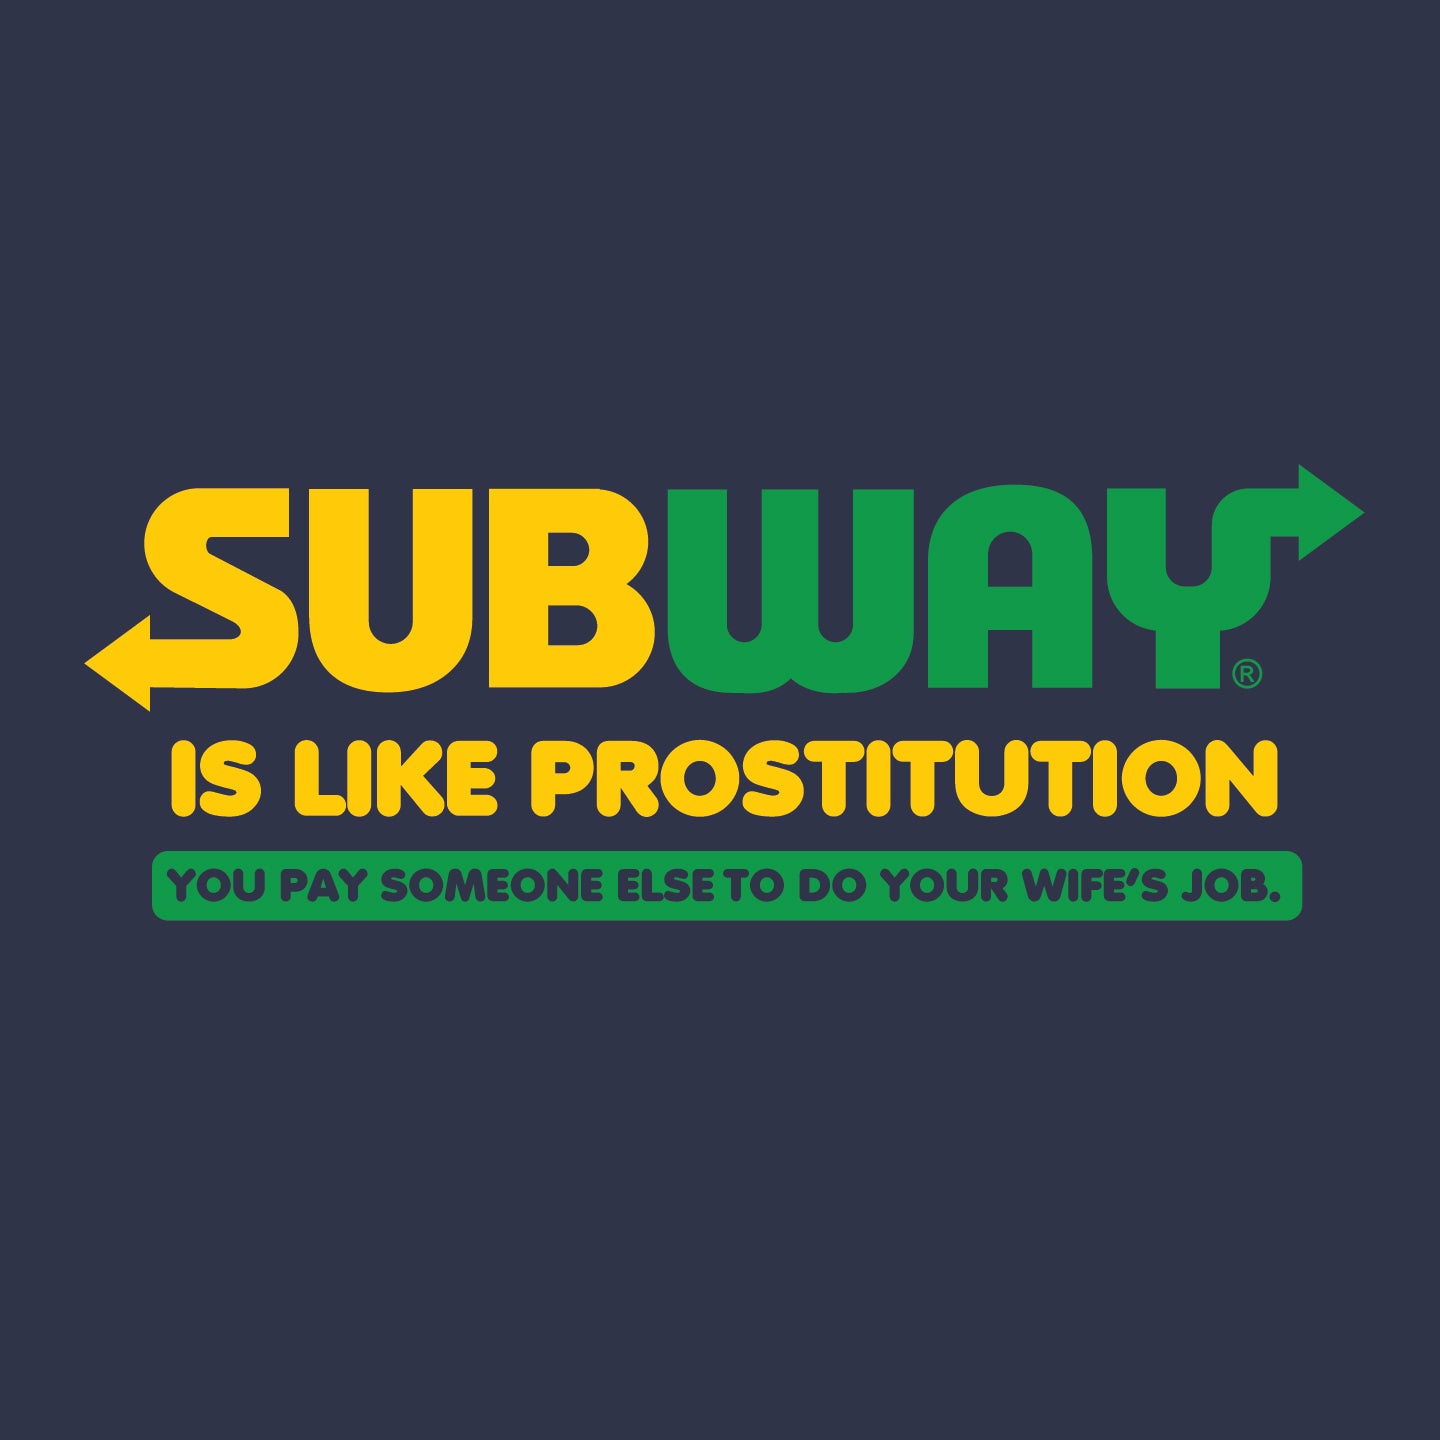 Subway is like prostitution